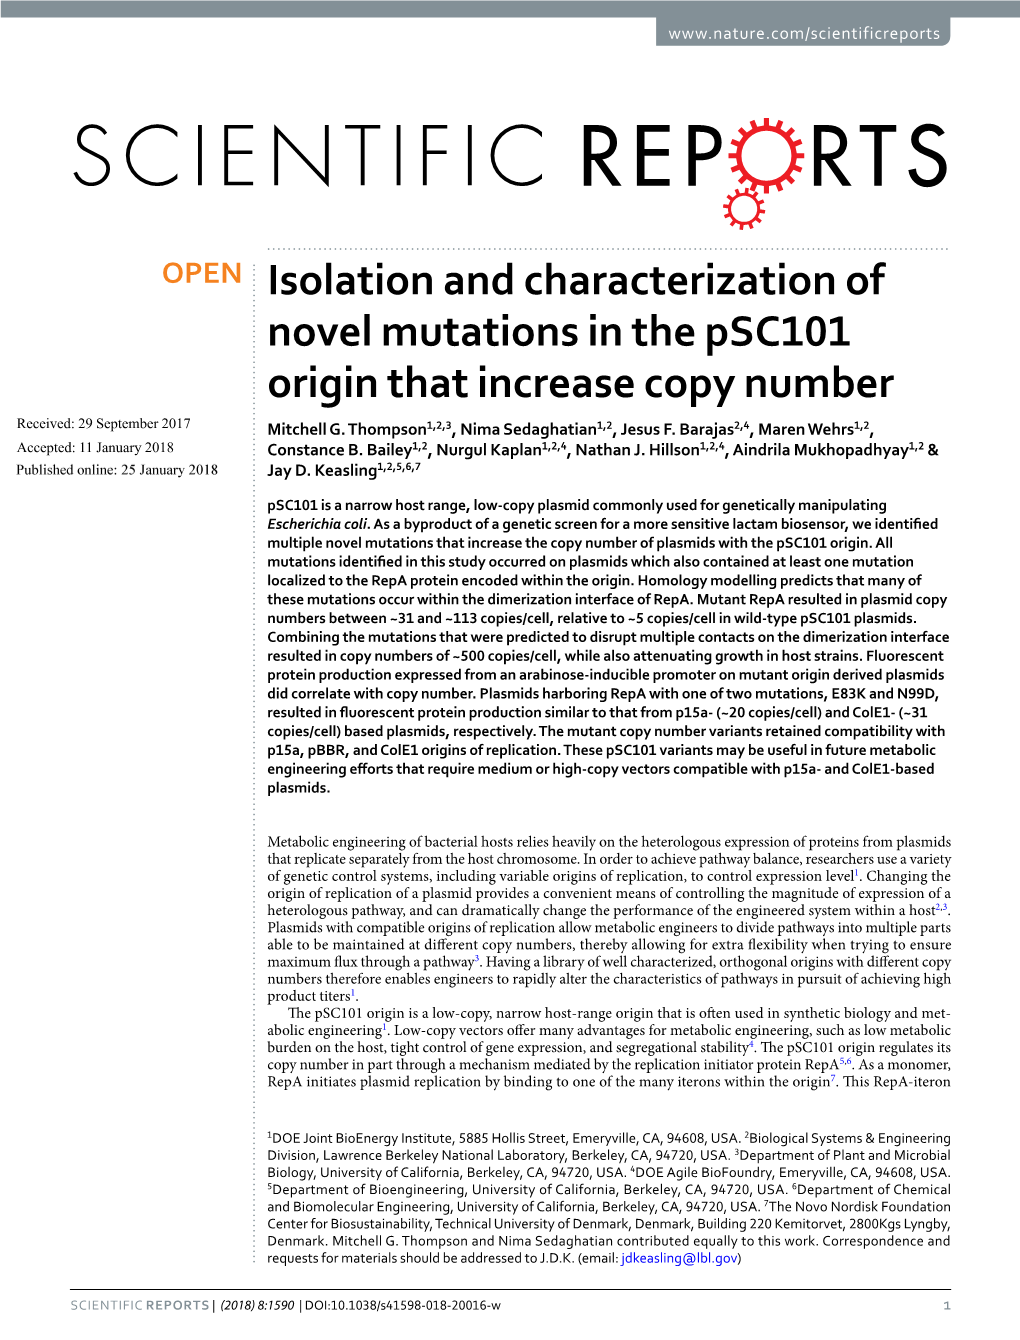 Isolation and Characterization of Novel Mutations in the Psc101 Origin That Increase Copy Number Received: 29 September 2017 Mitchell G